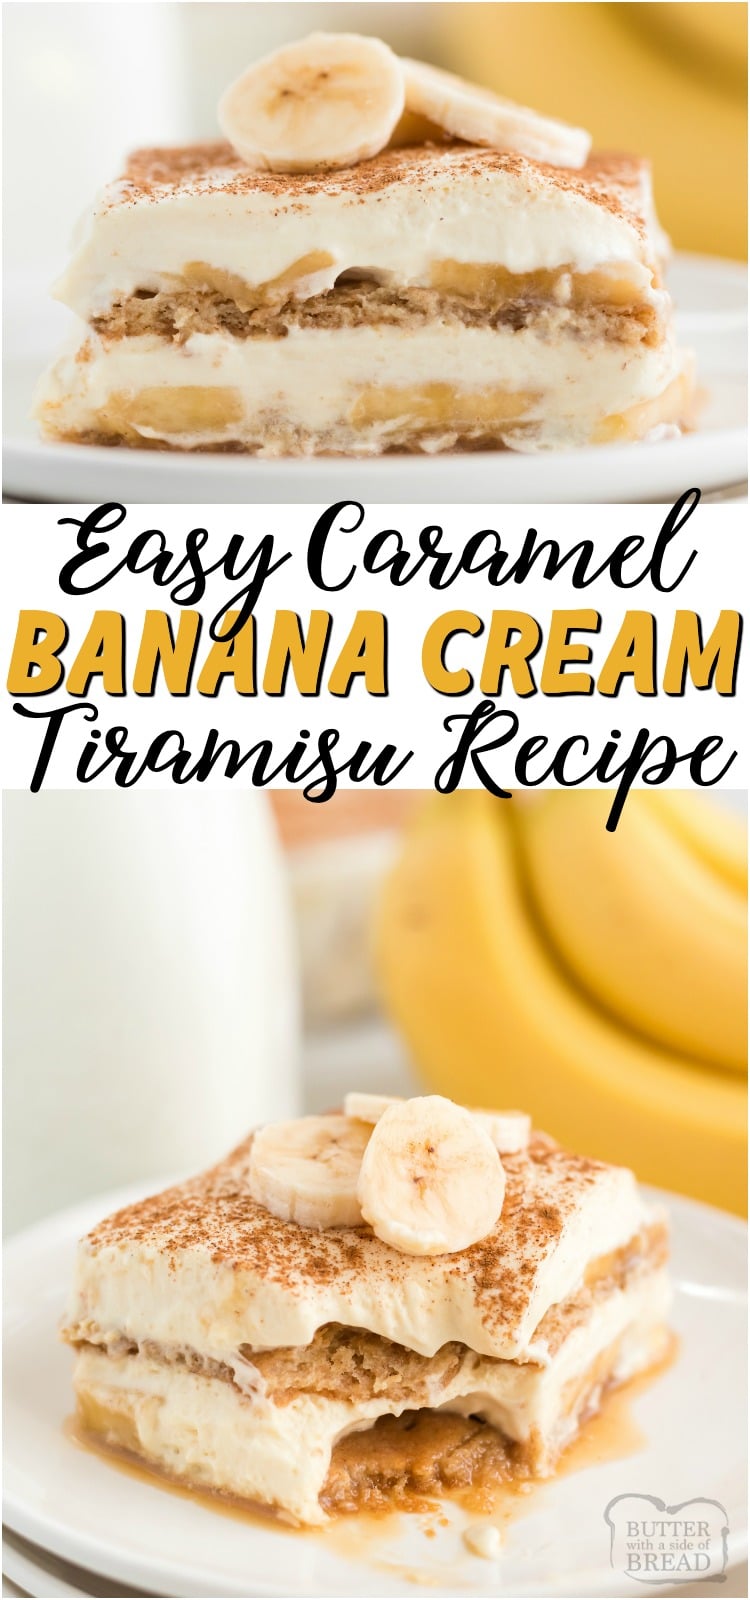 Easy recipe for Caramel Banana Cream Tiramisu that uses graham crackers and a pudding-caramel mixture in layers. Comes together so fast & is delicious!